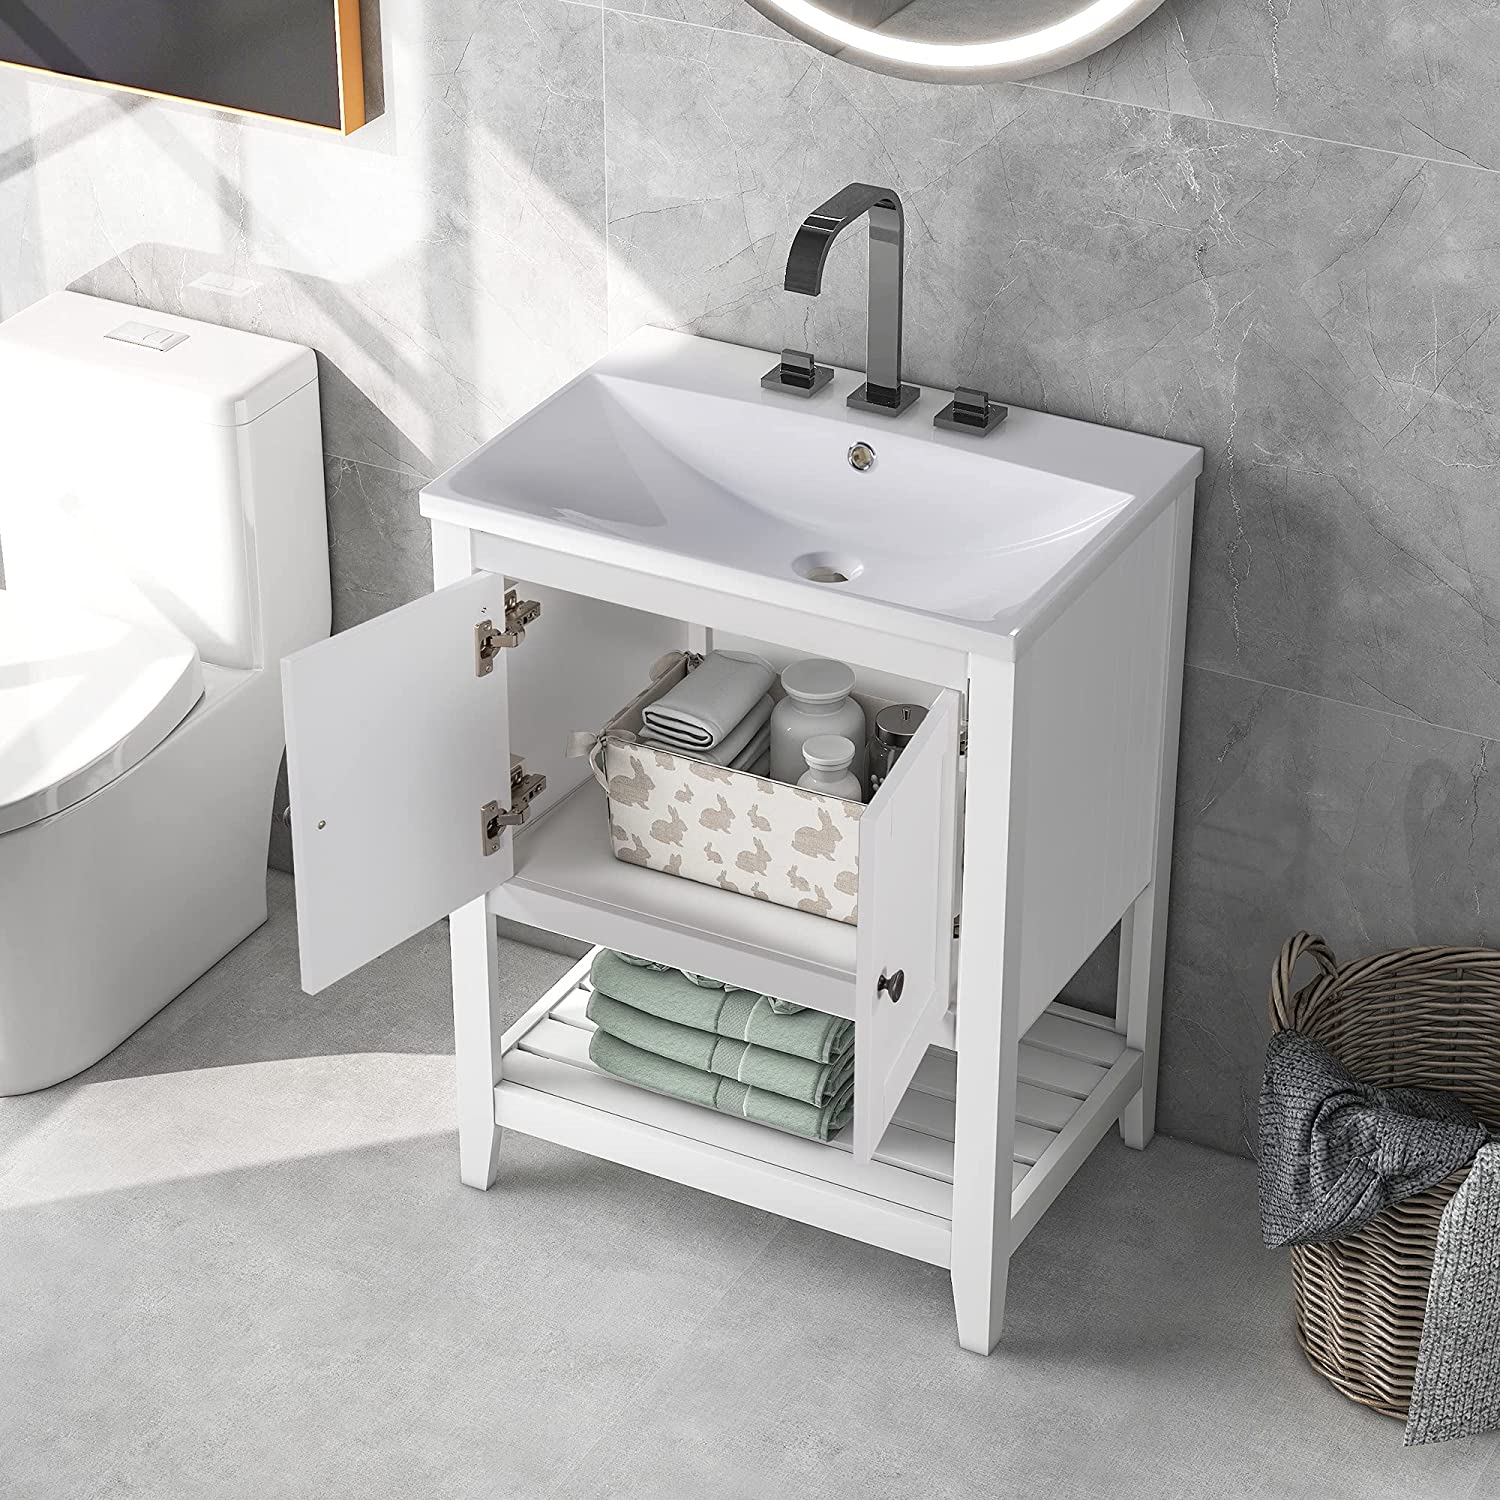 Bathroom Vanity Cabinet with Sink Furniture for Sale - MLEZAN